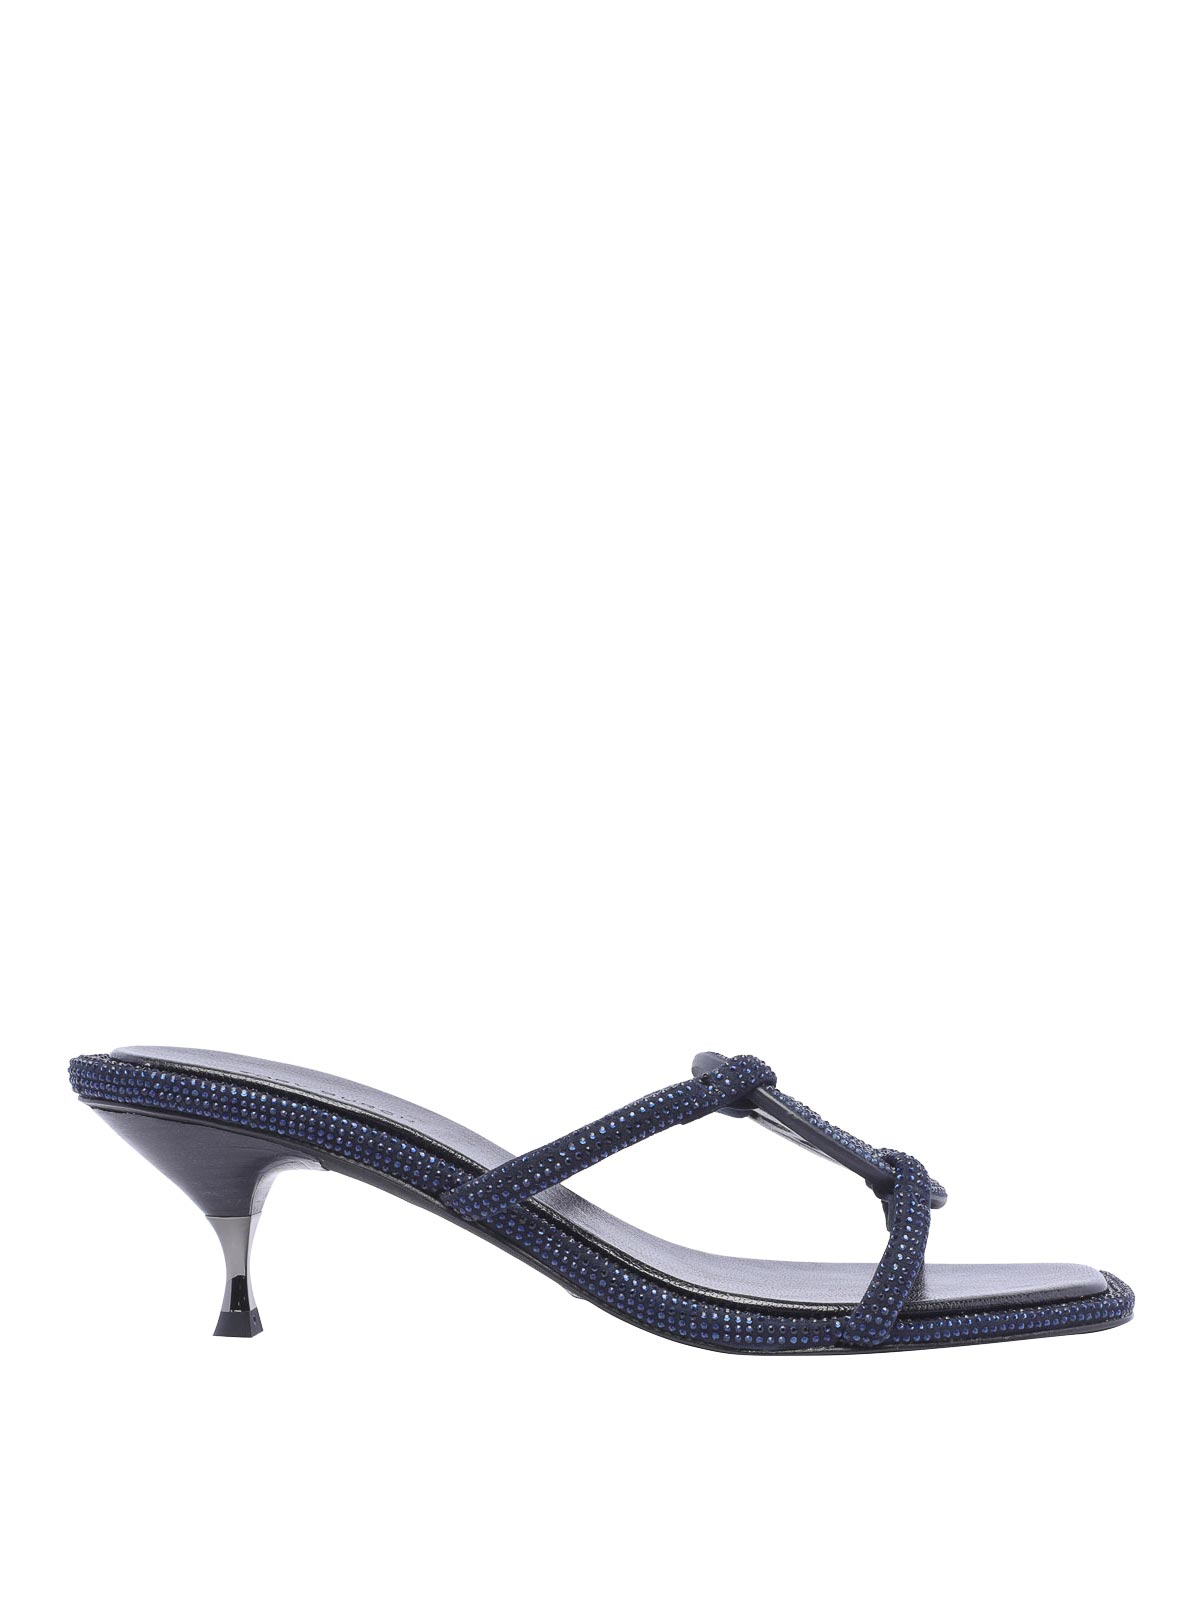 Tory Burch Pave Geo Bombe Miller Heel Sandals In Blue